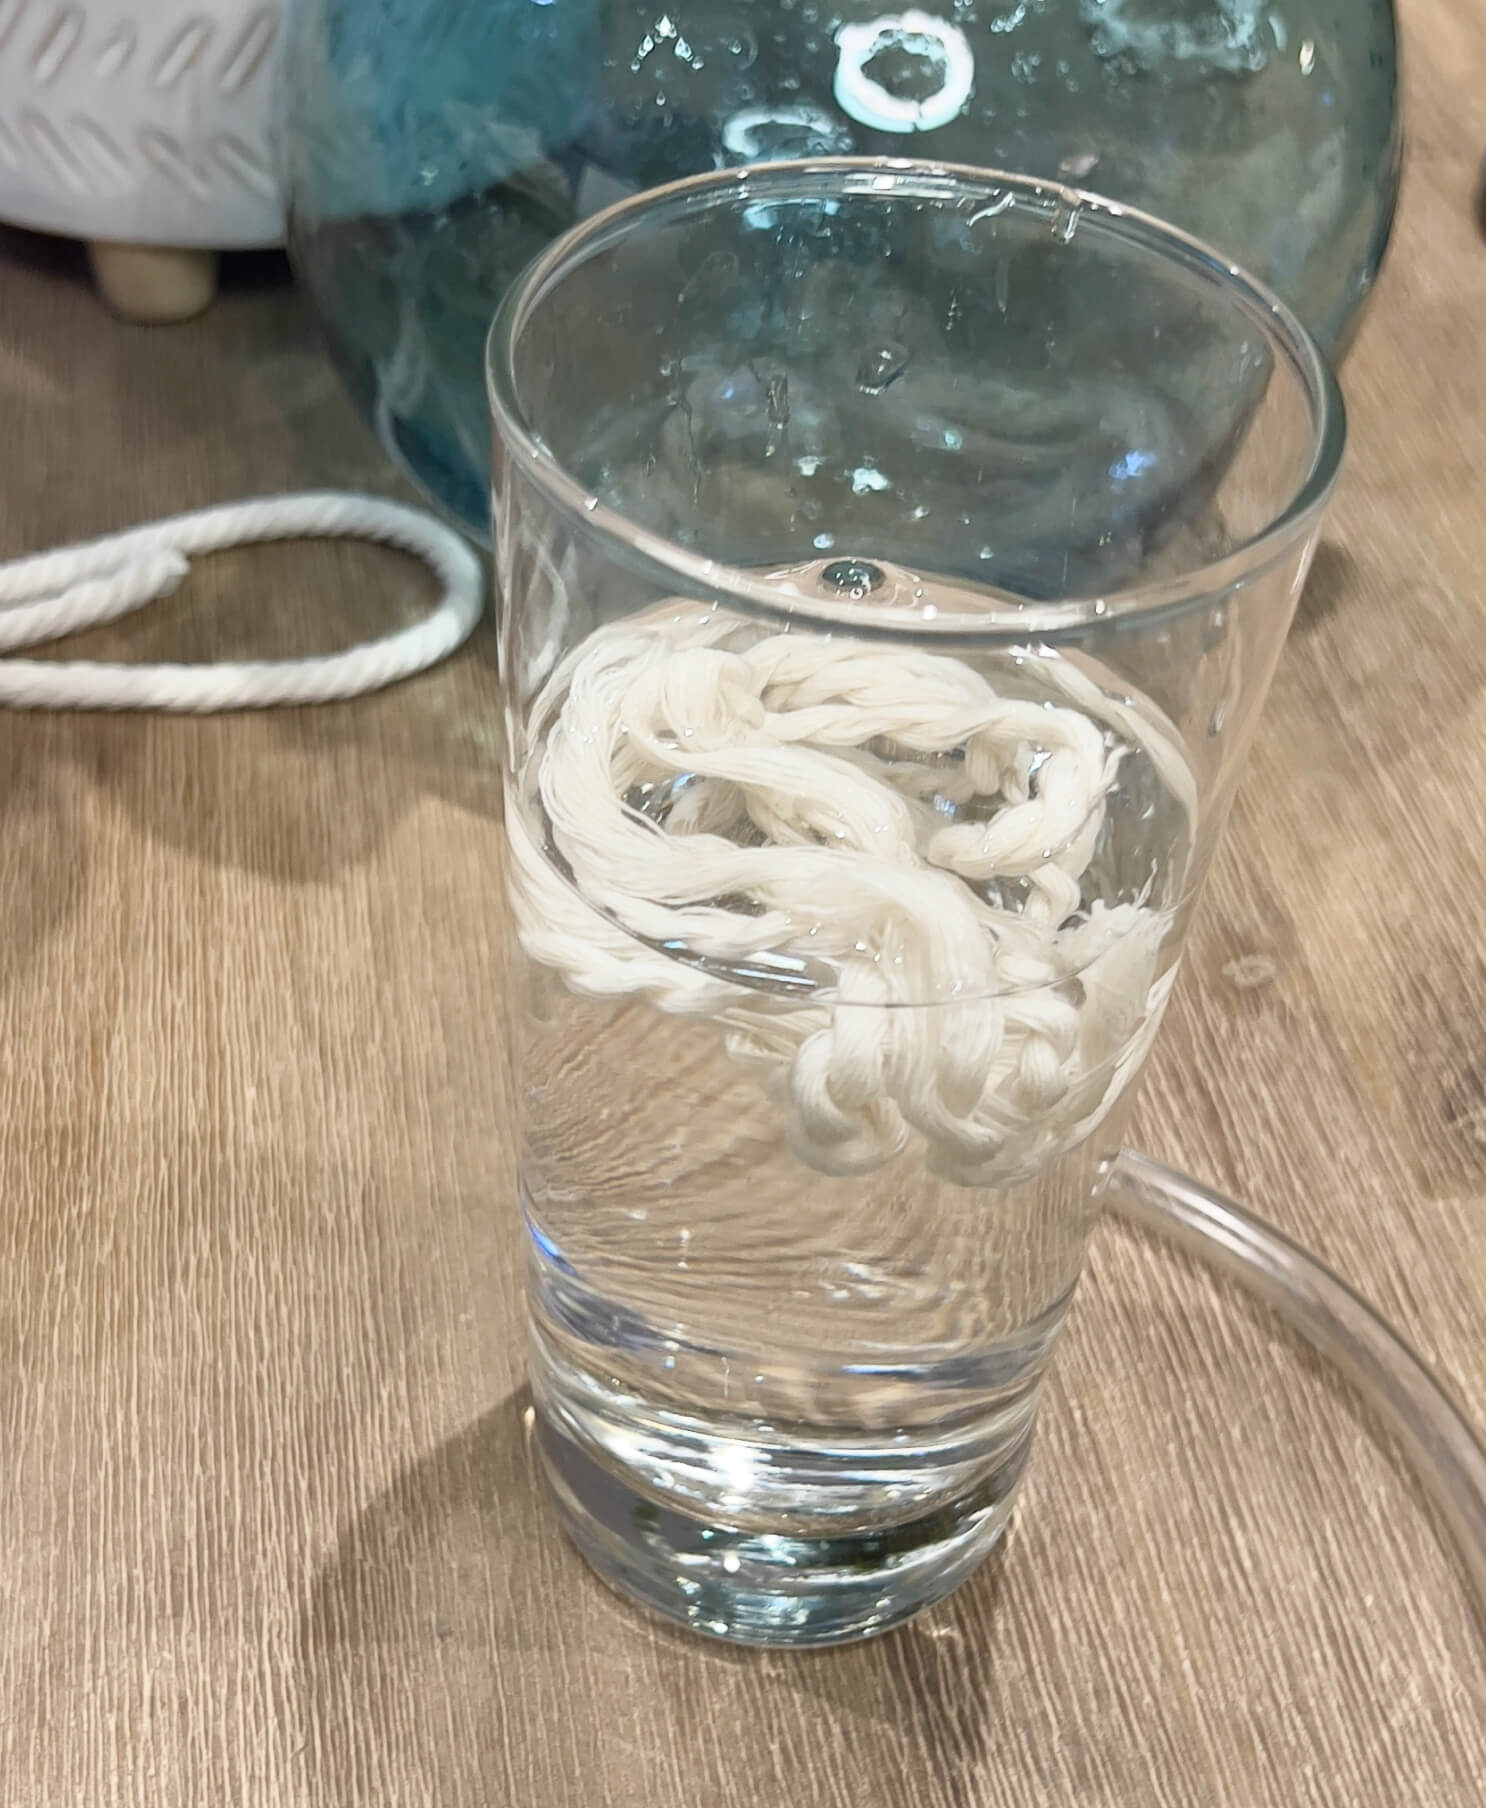 wet your cotton cord in water for plant straw